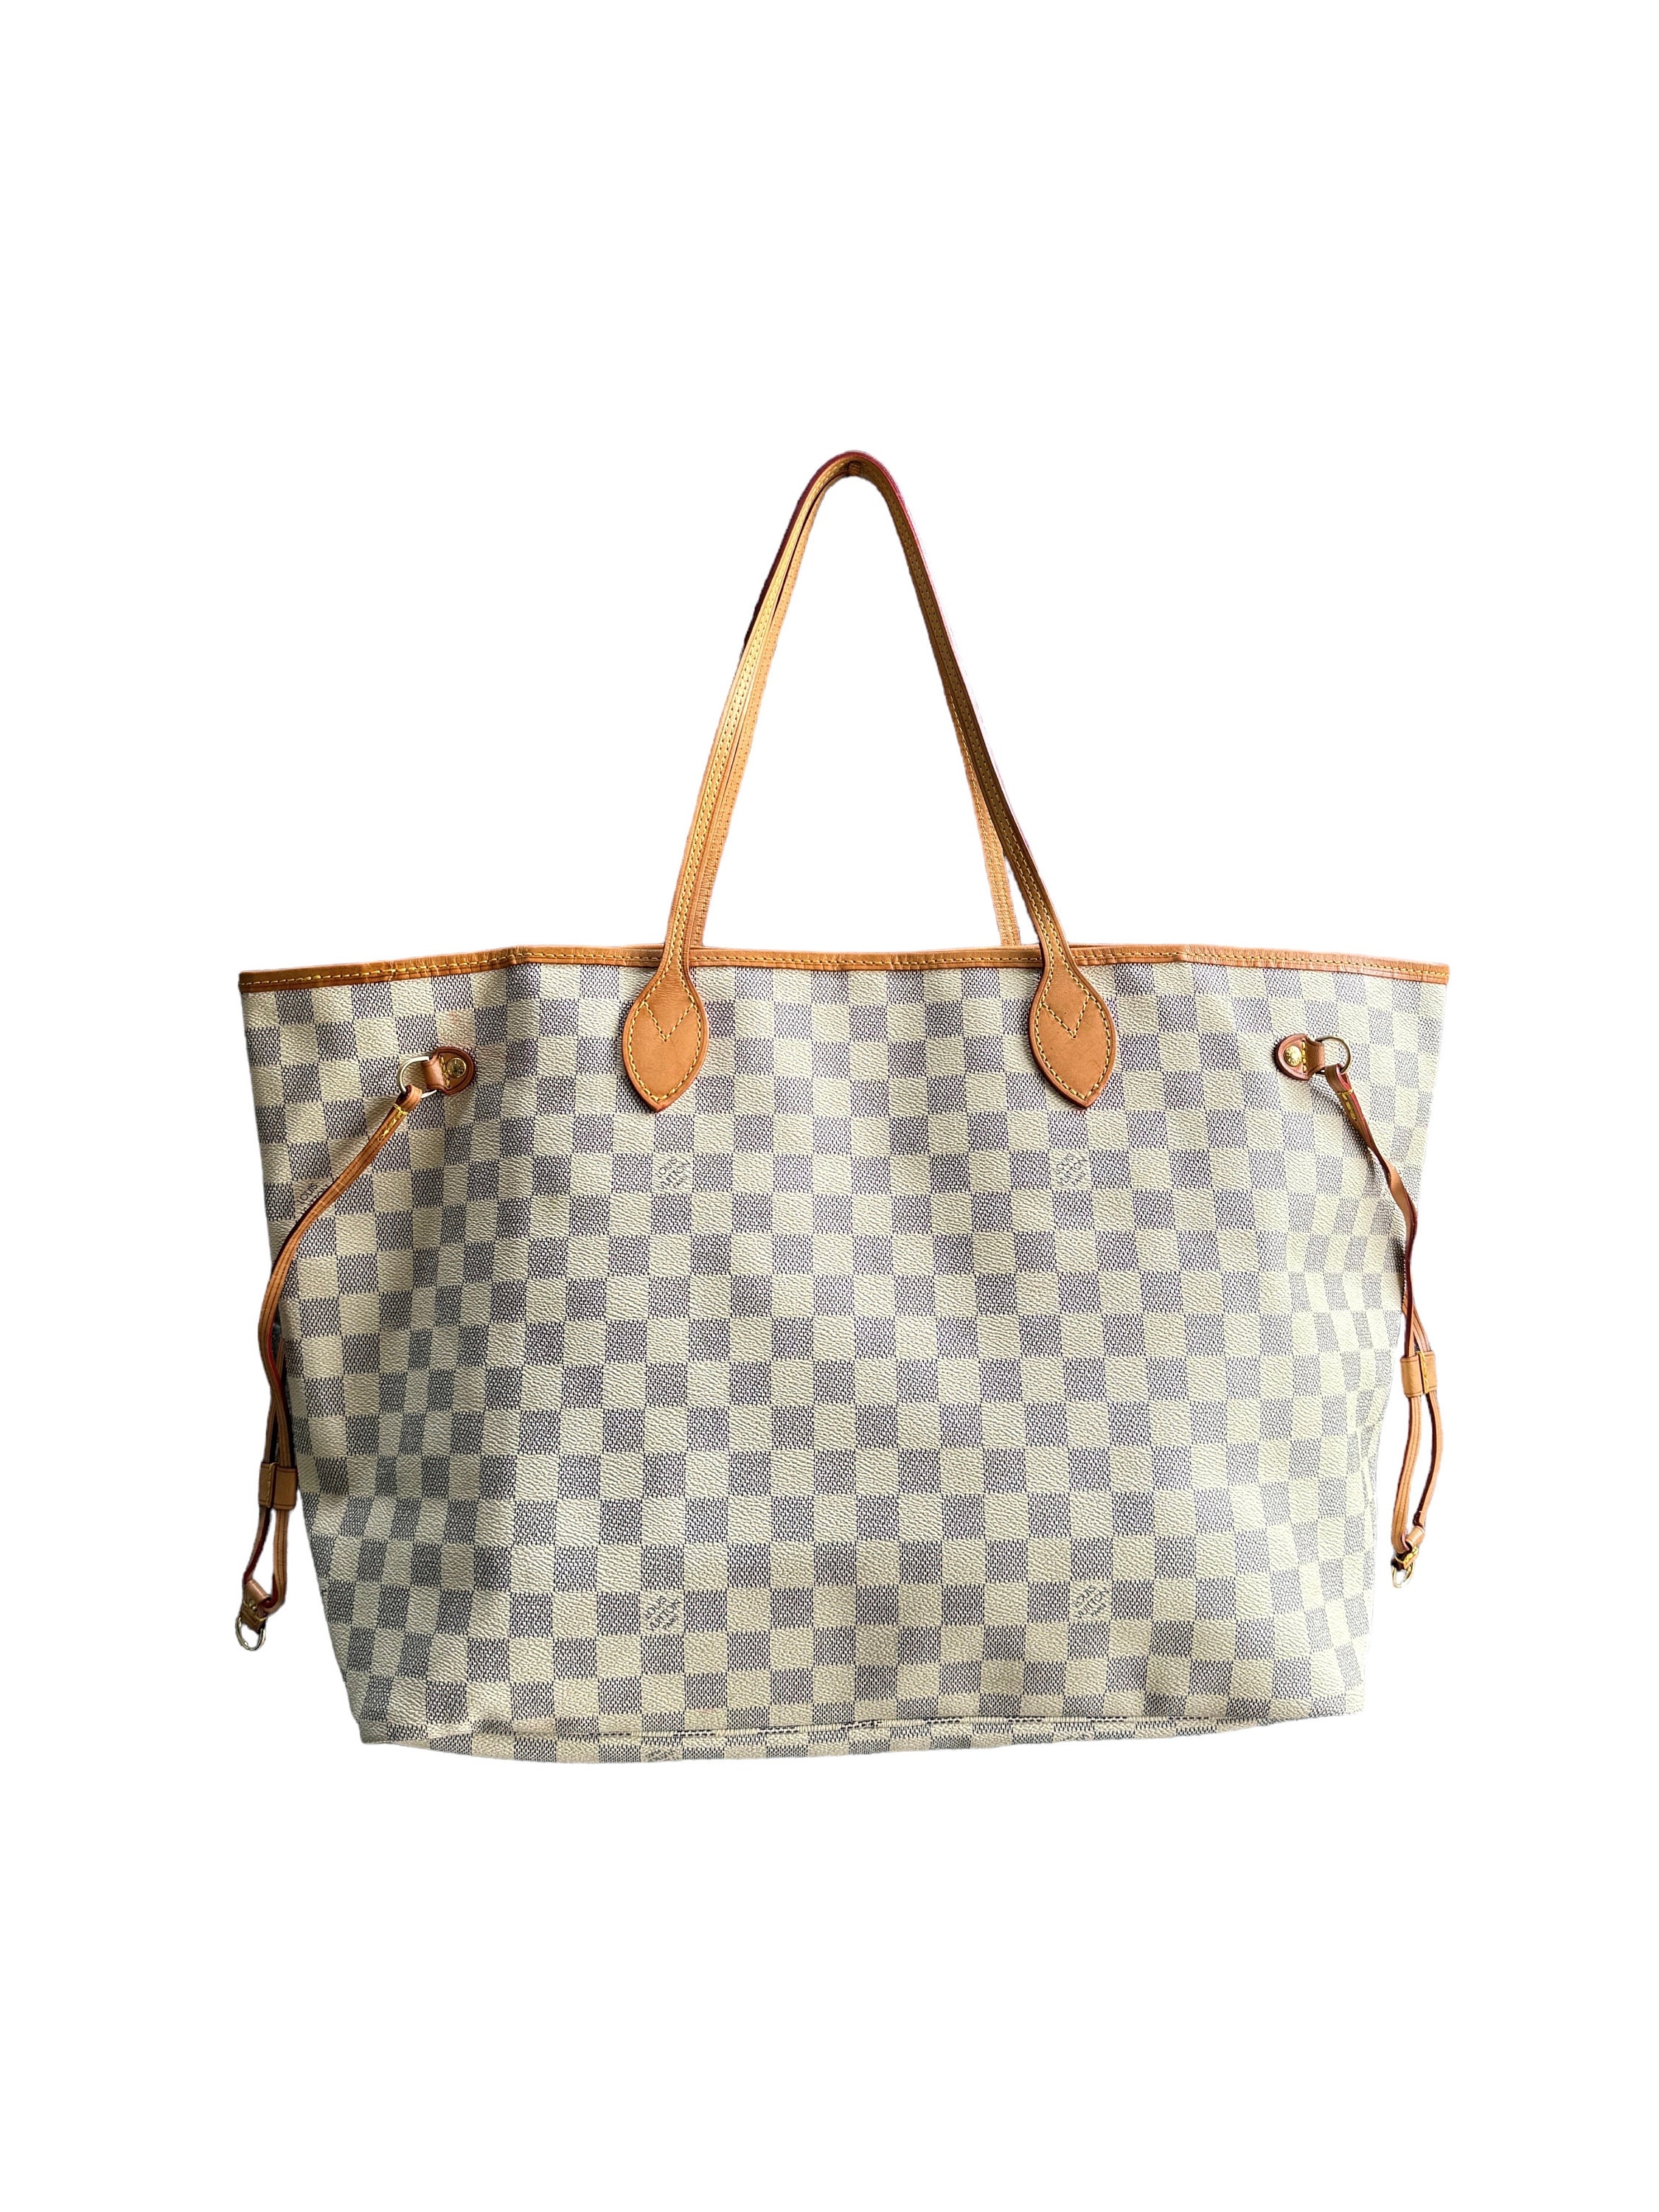 off brand louis v tote